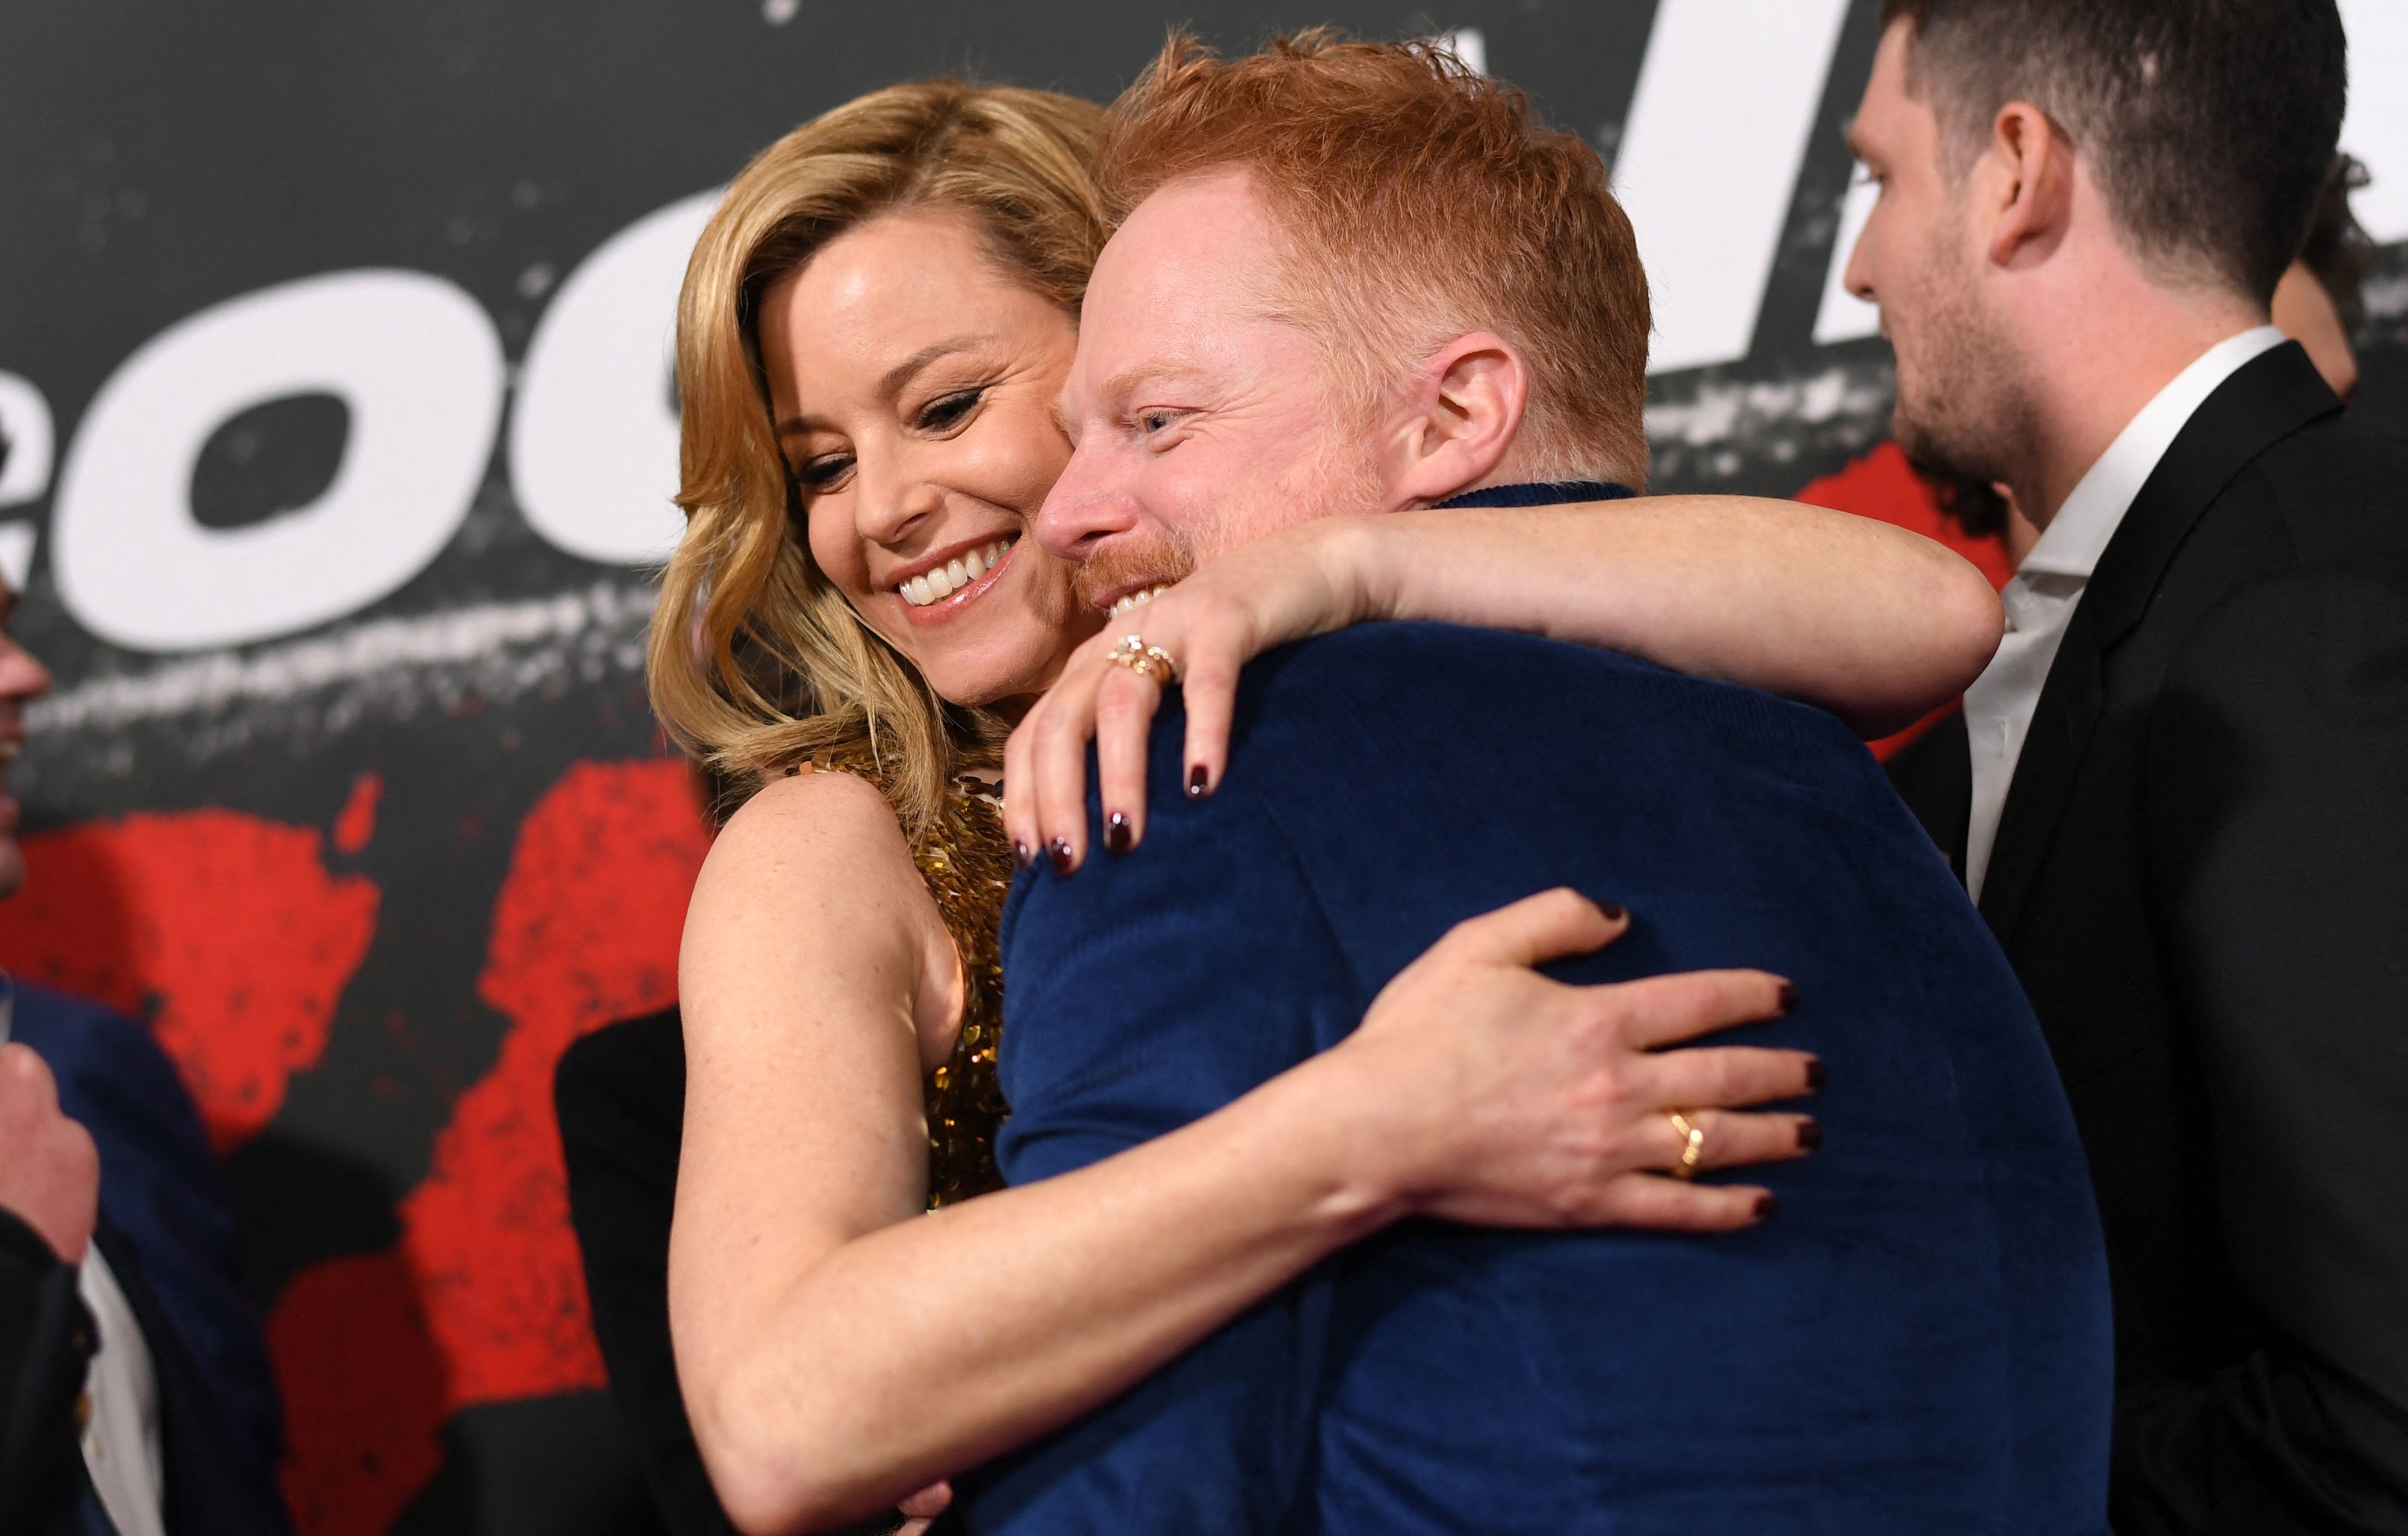 Elizabeth and Jesse hugging at the Cocaine Bear premiere